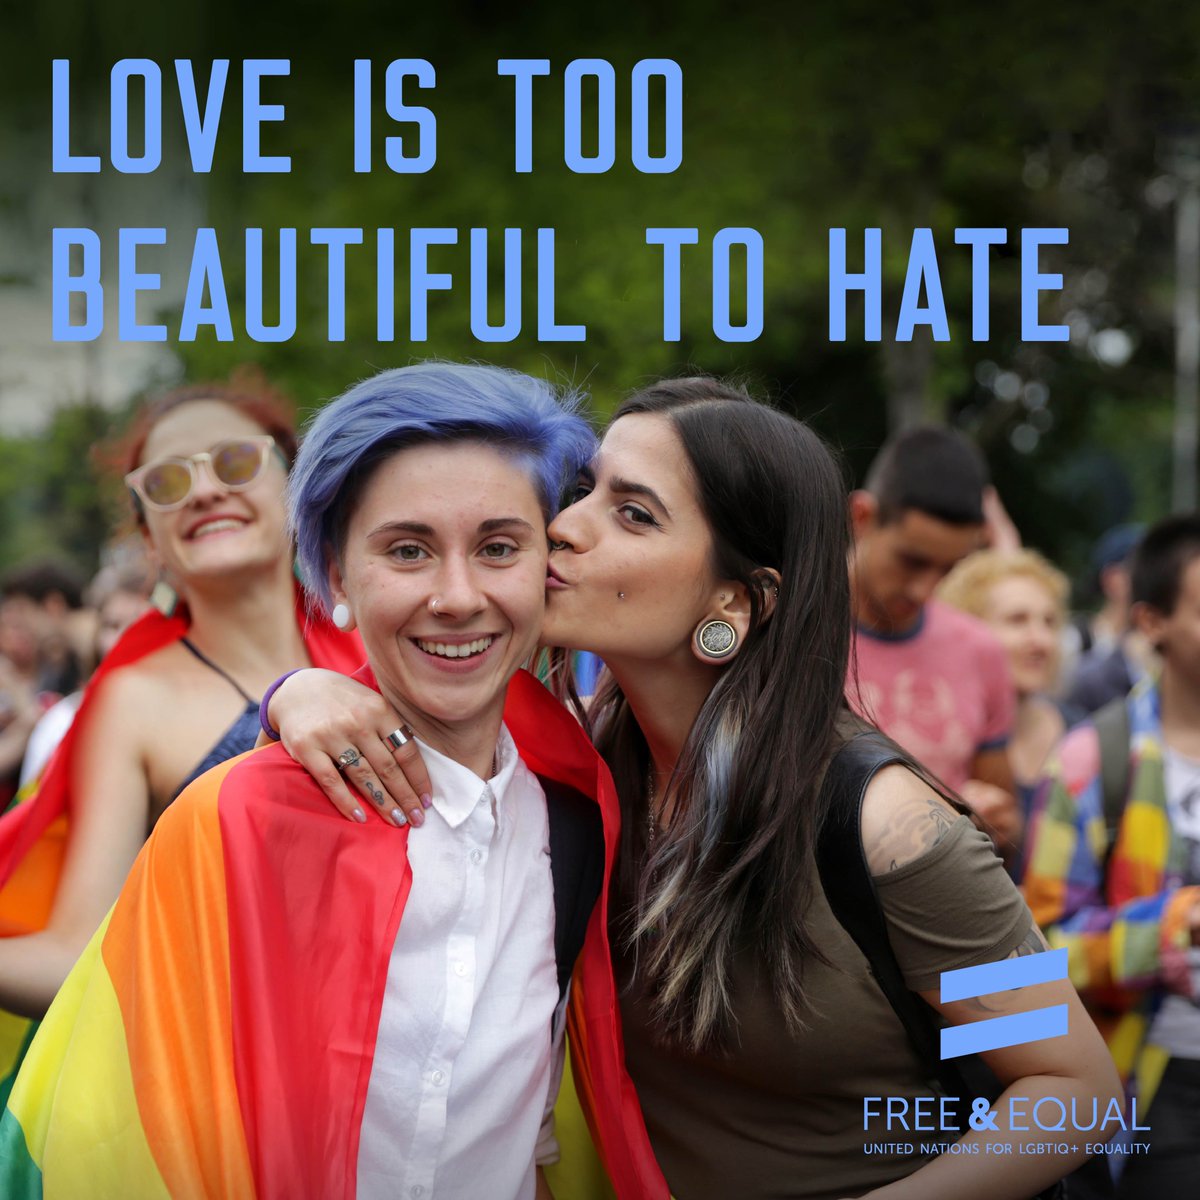 Let’s celebrate love in all its beautiful forms! #LoveIsLove #LoveWins 🌈